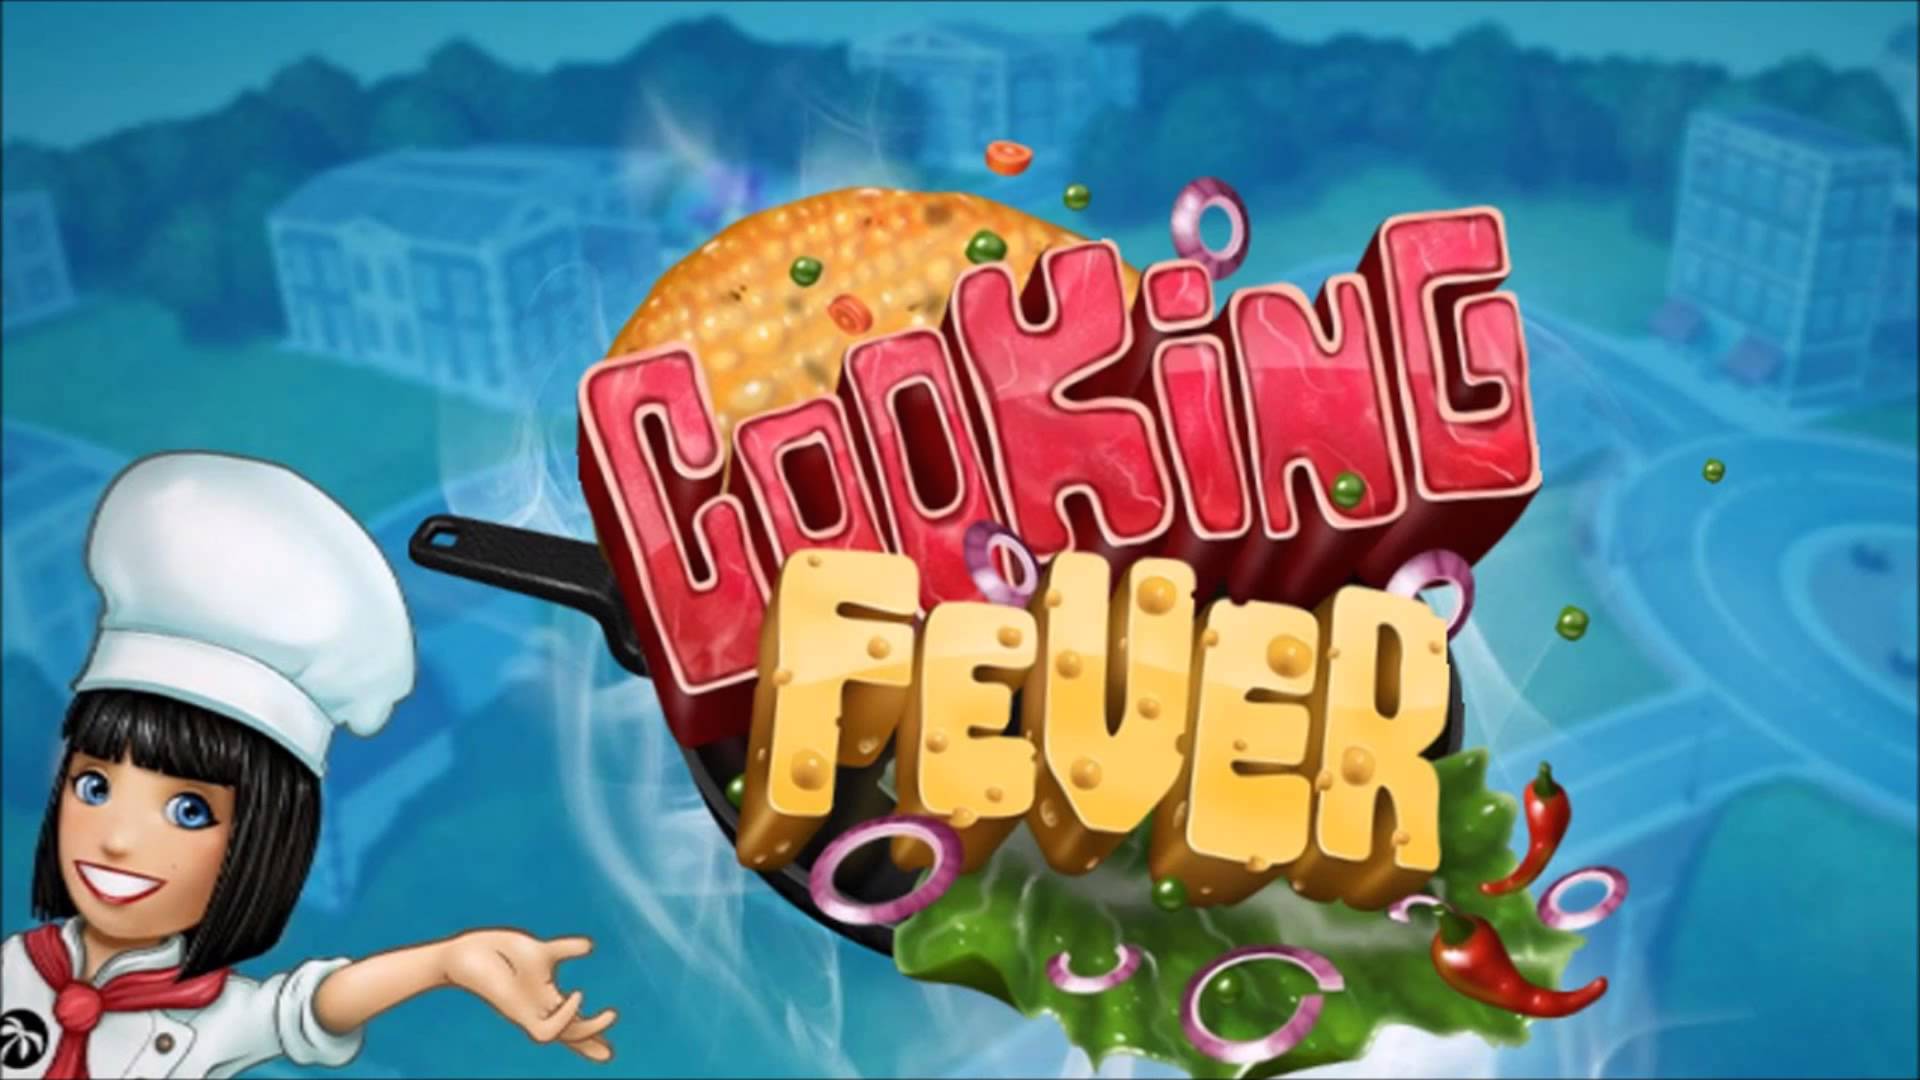 Farming Fever: Cooking Games instaling